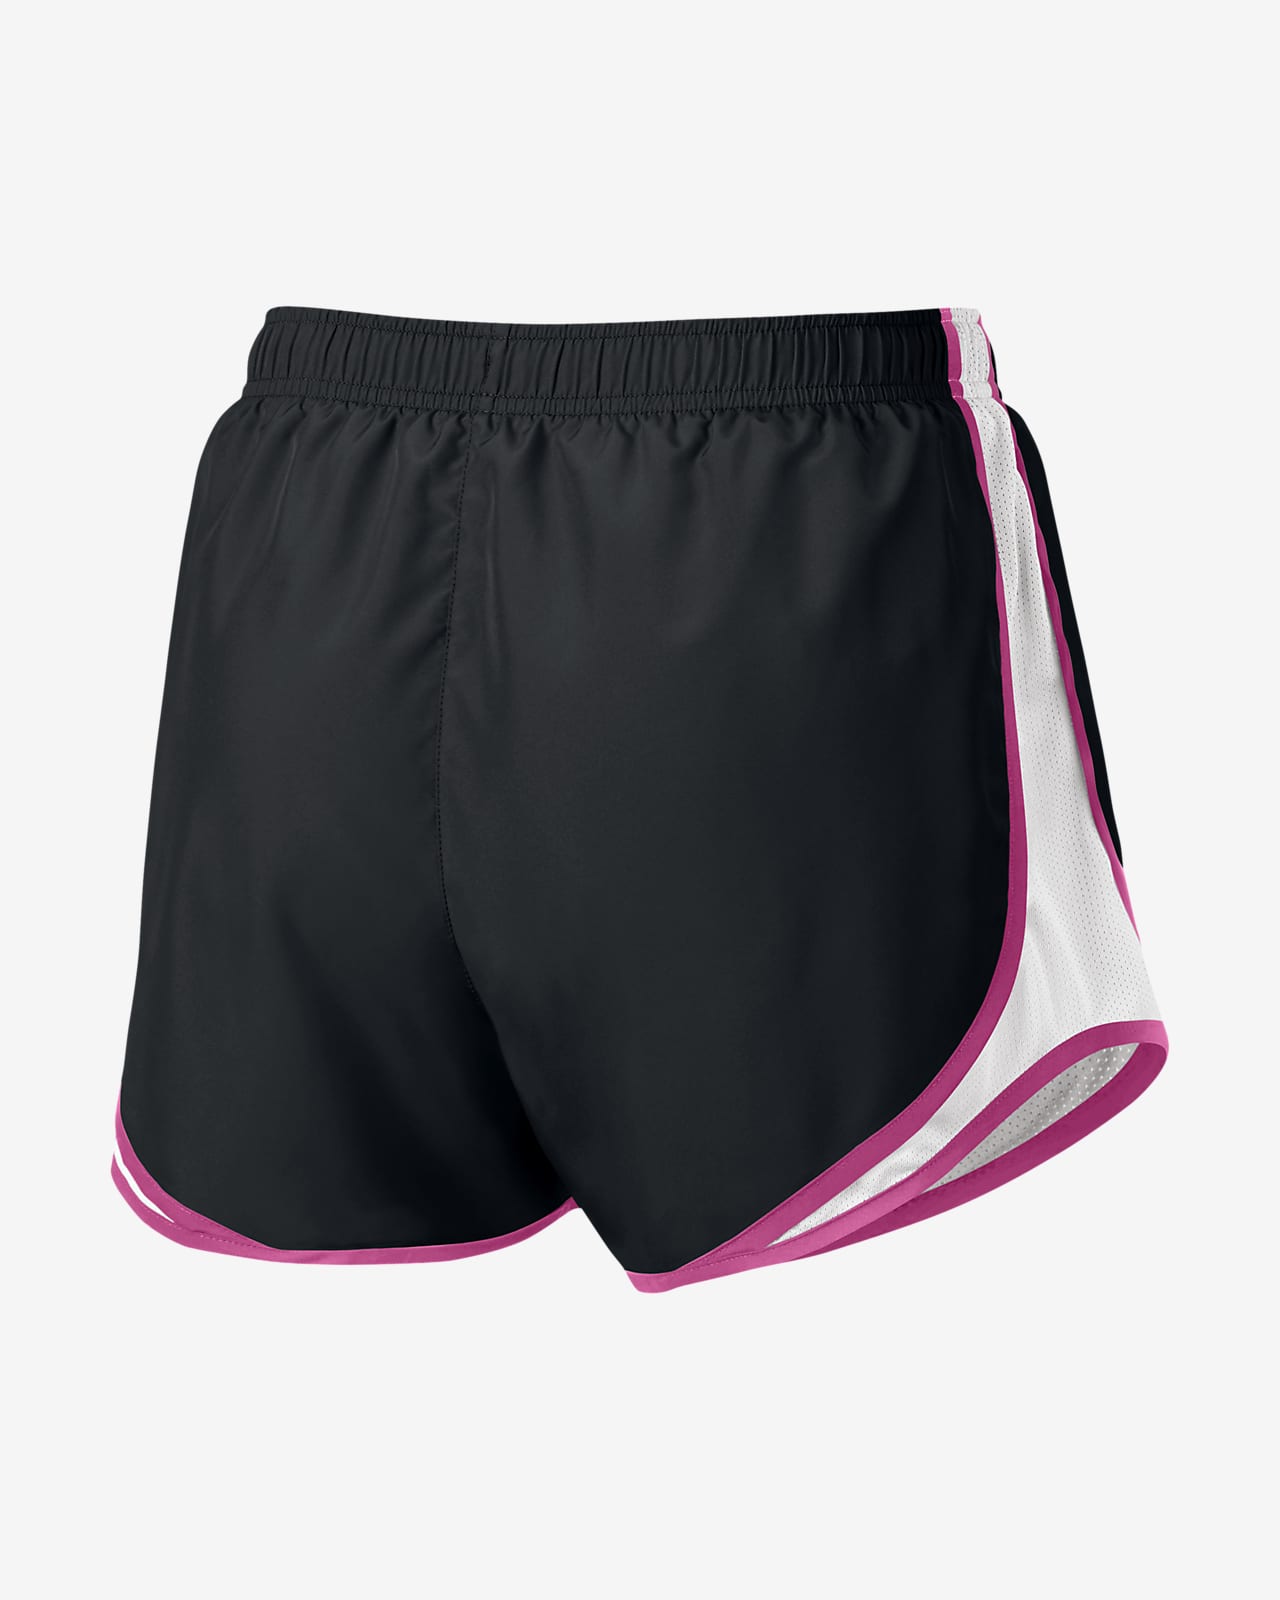 Nike Black and White Fully Lined Running Shorts, Girl's Size XSmall